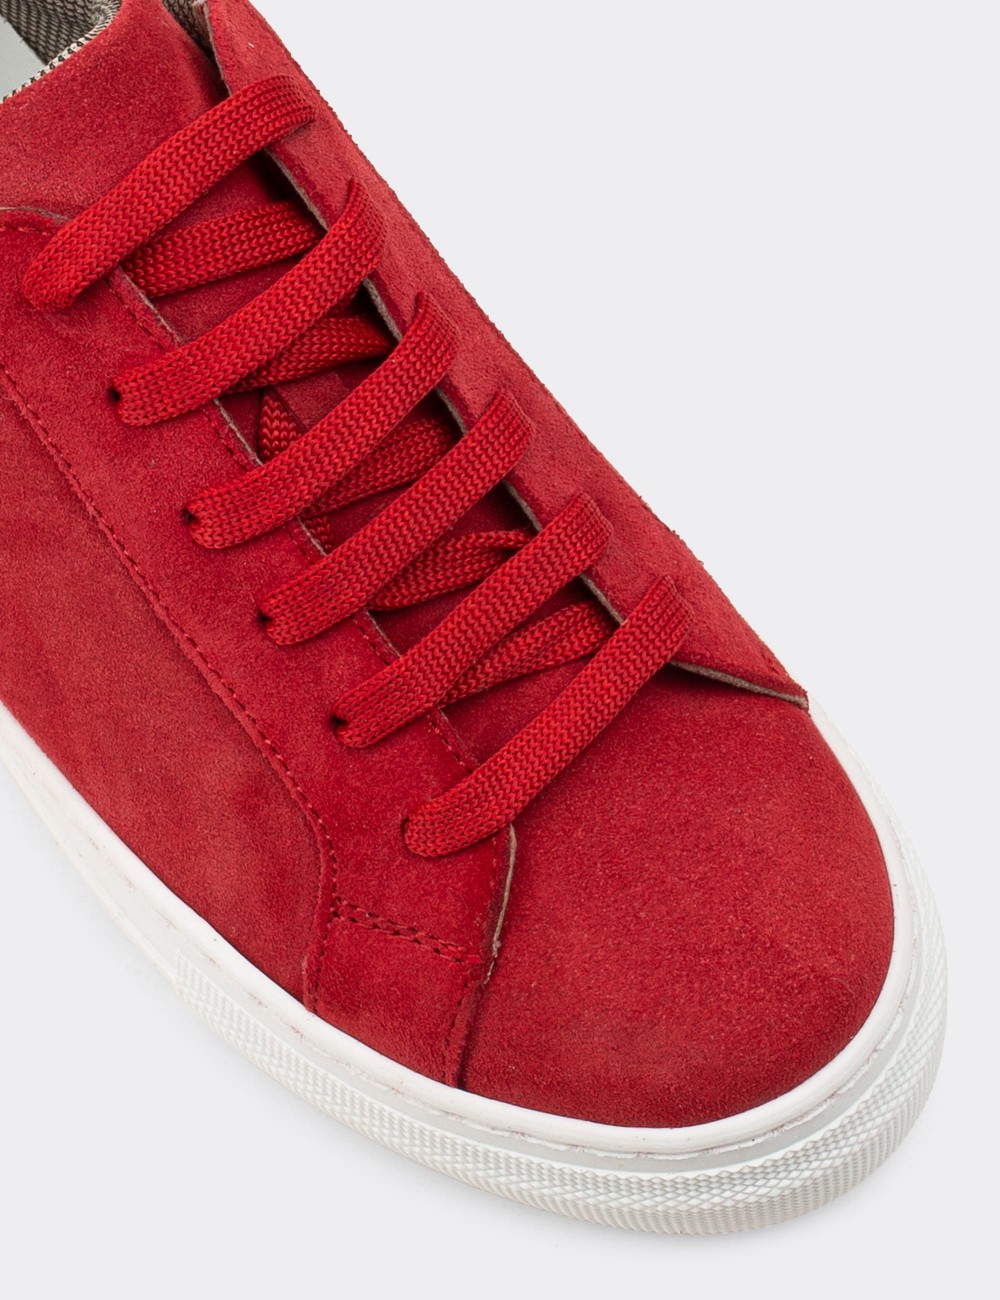 Red Suede Leather Sneakers - Z1681ZKRMC01